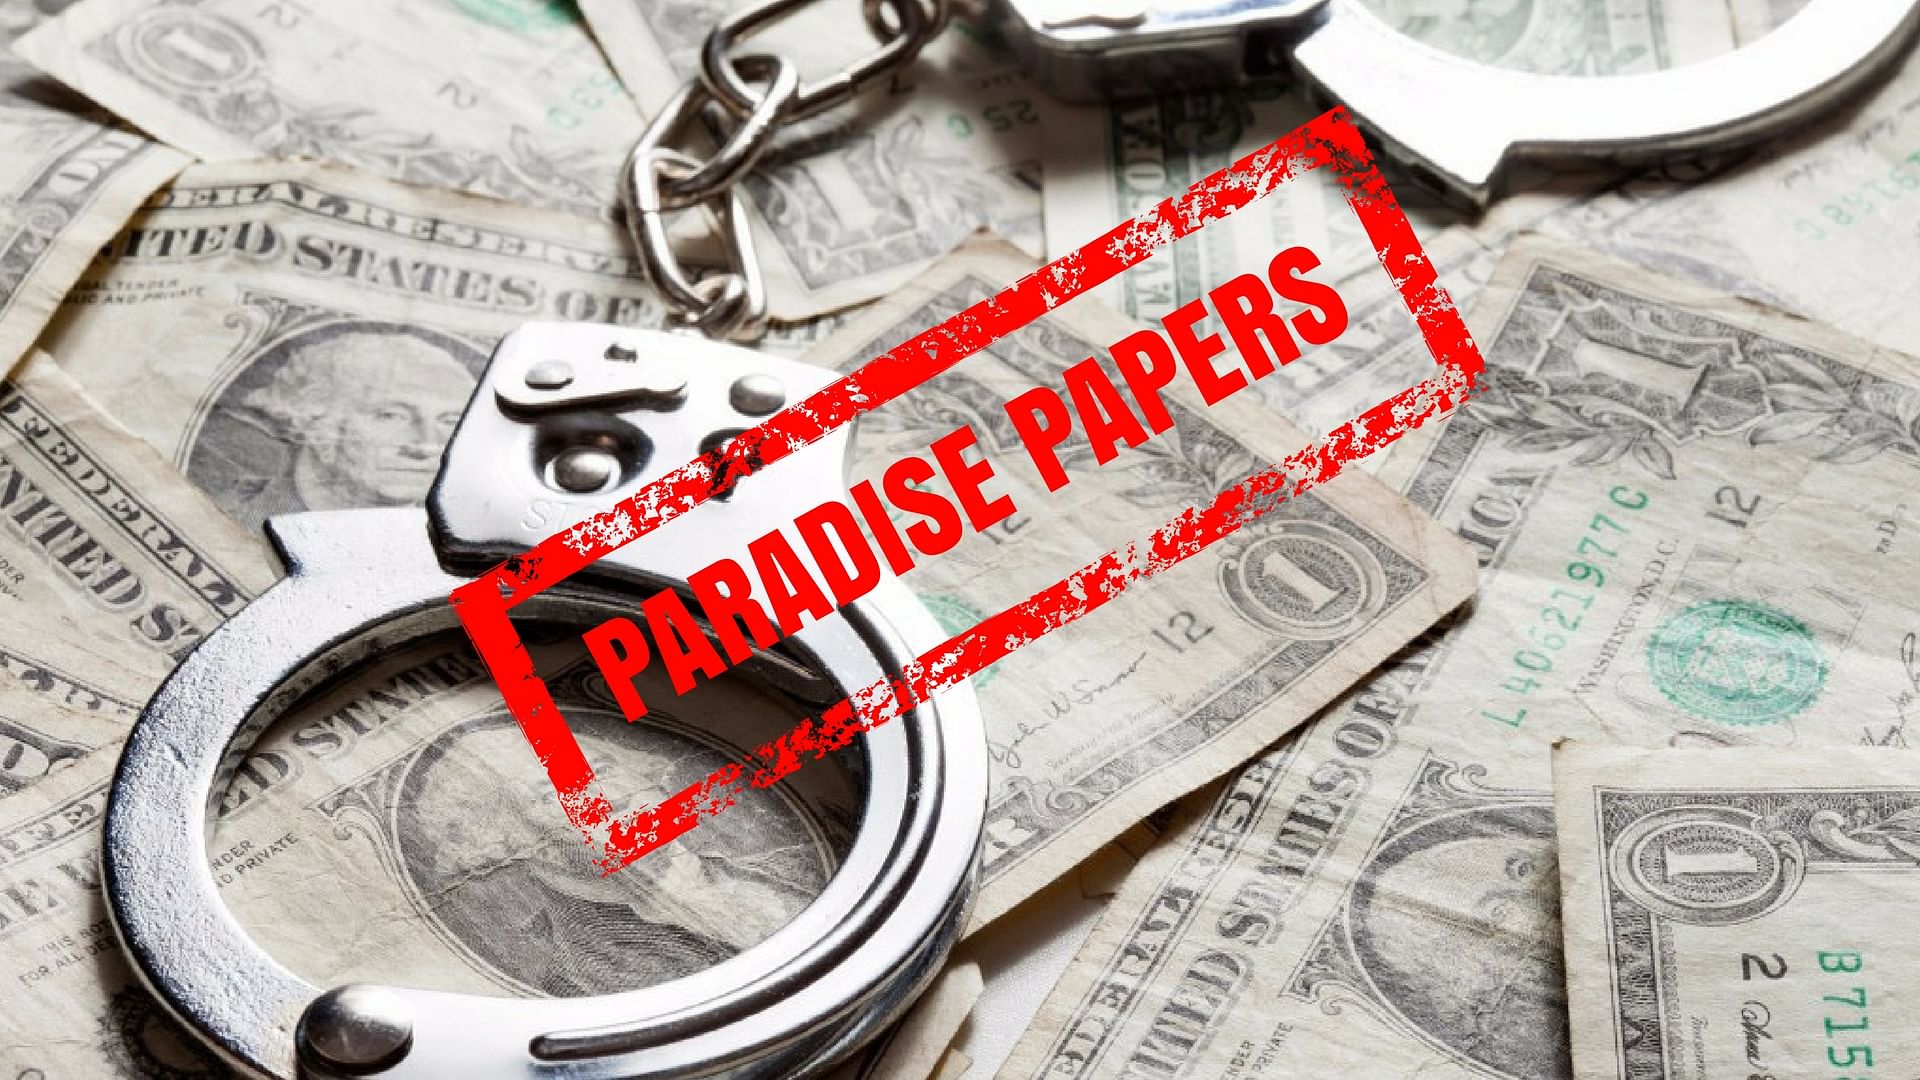 Do the people named in the Paradise Papers deserve to be behind bars?